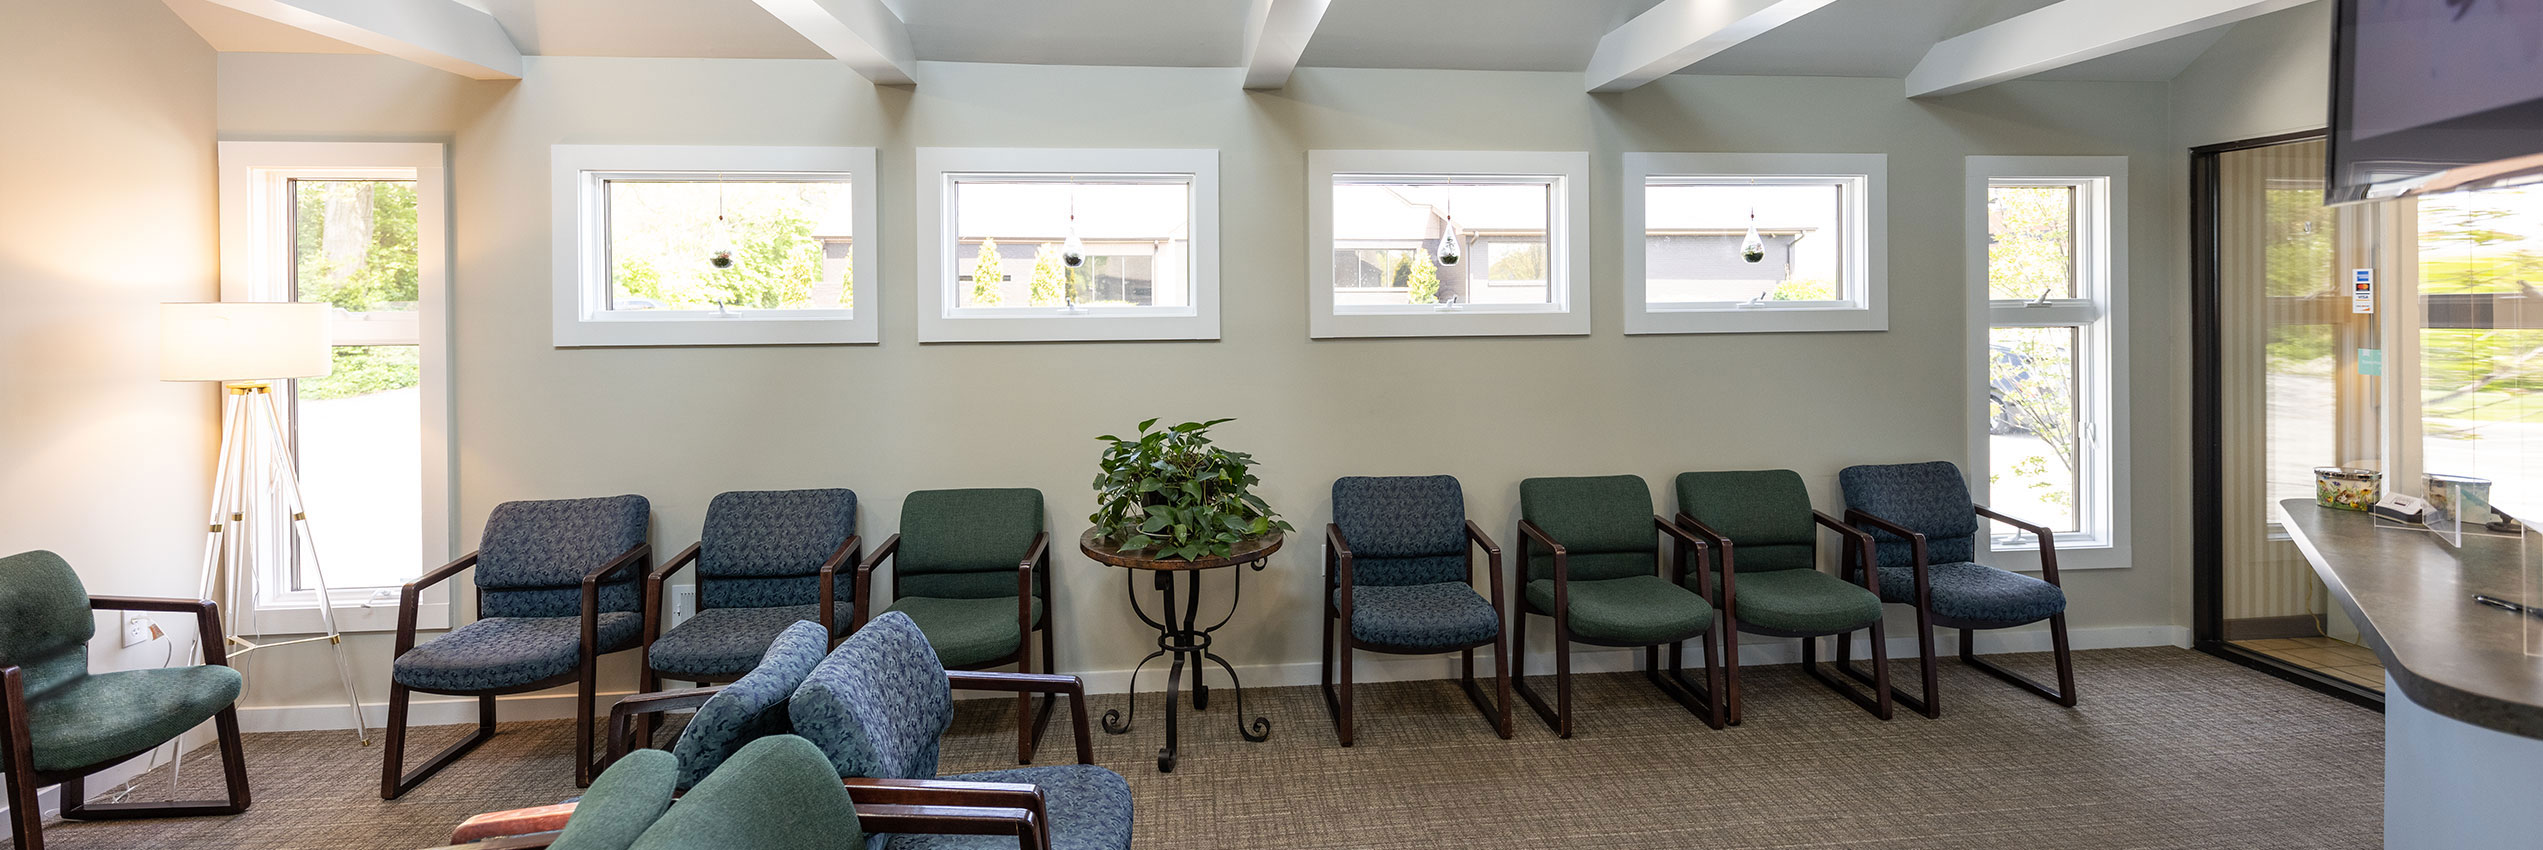 Seibert Complete Dentistry office waiting room